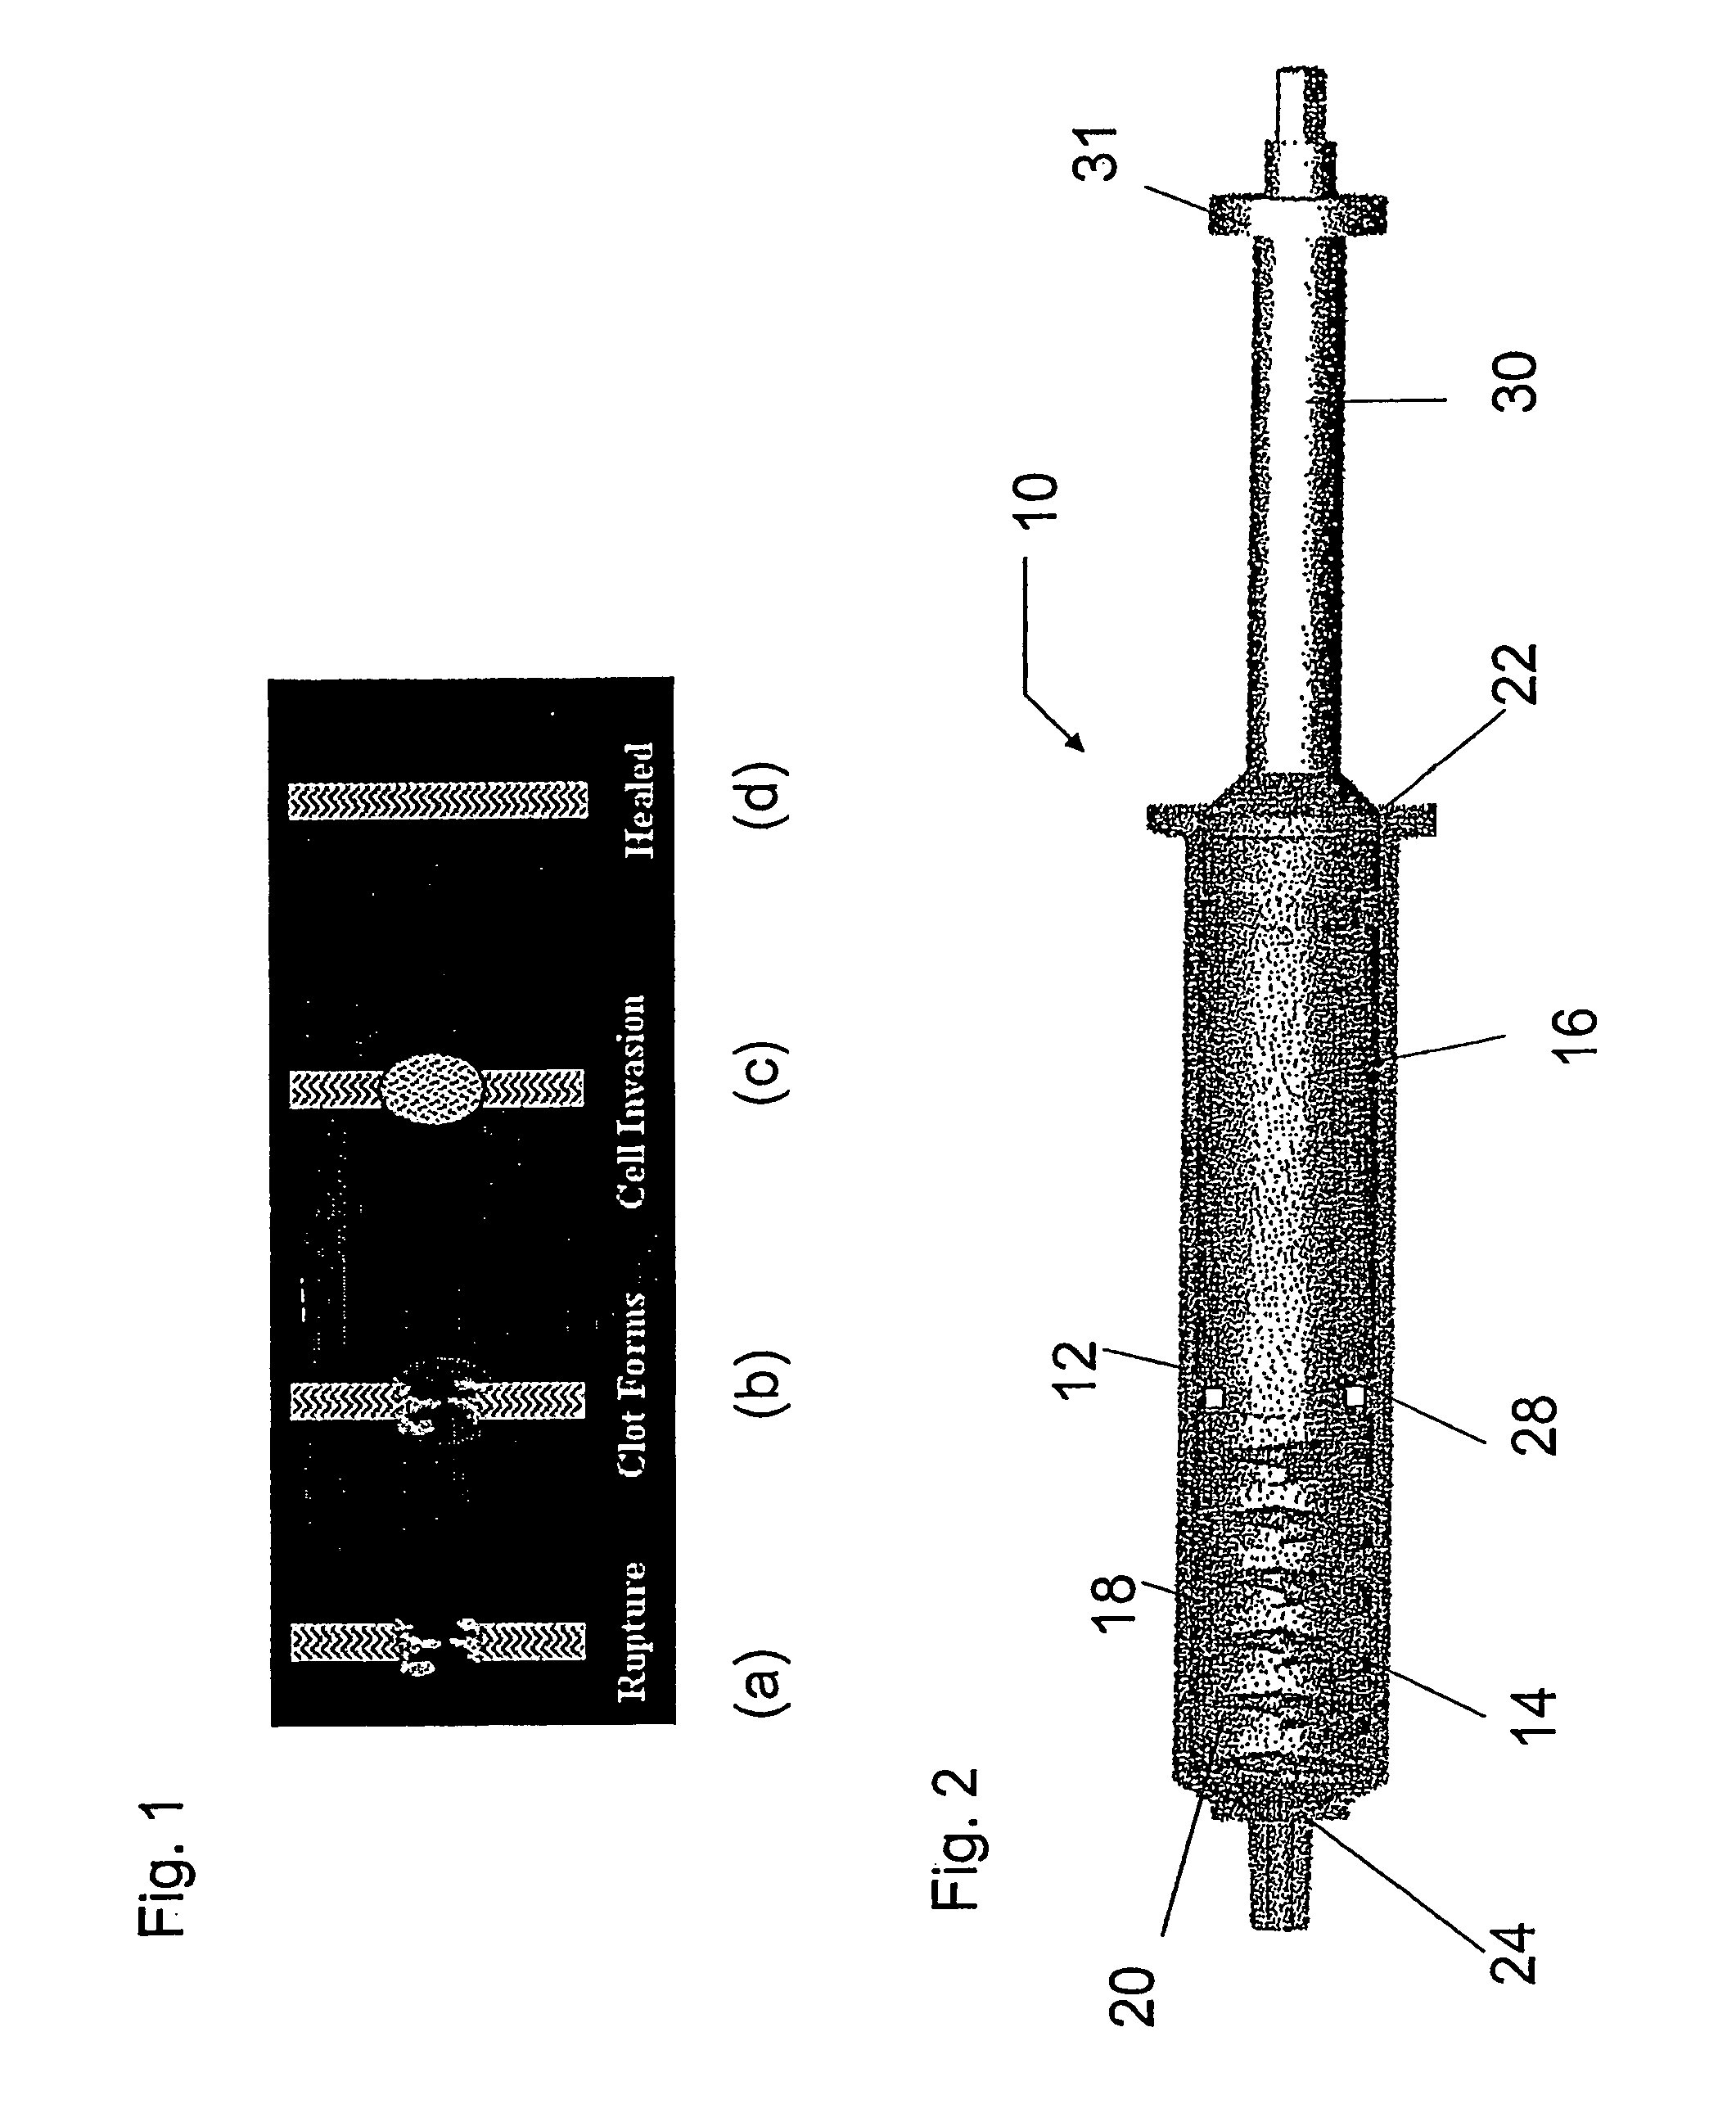 Device for mixing and delivering fluids for tissue repair